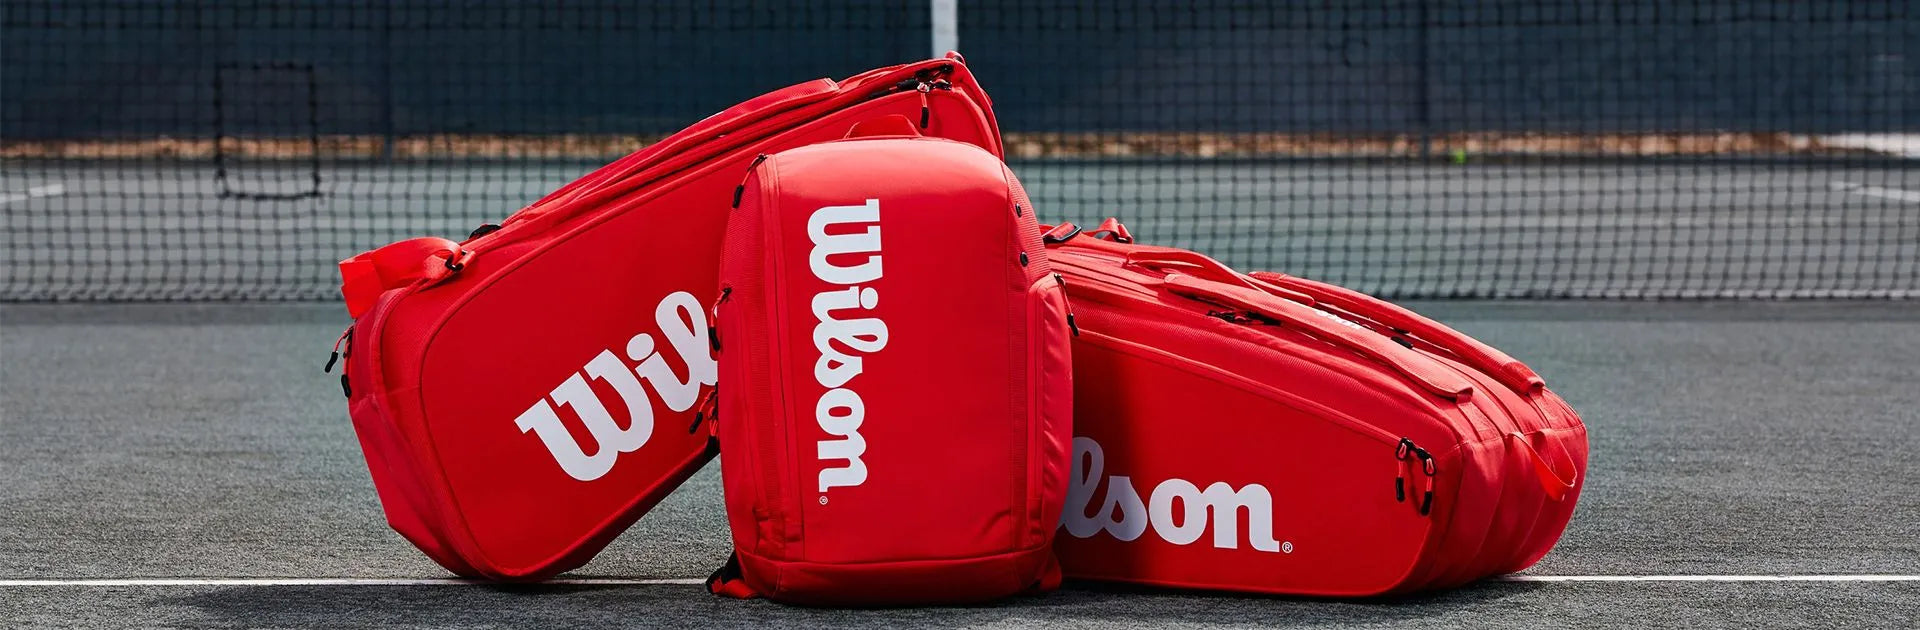 Wilson tennis bags and backpacks on a tennis court